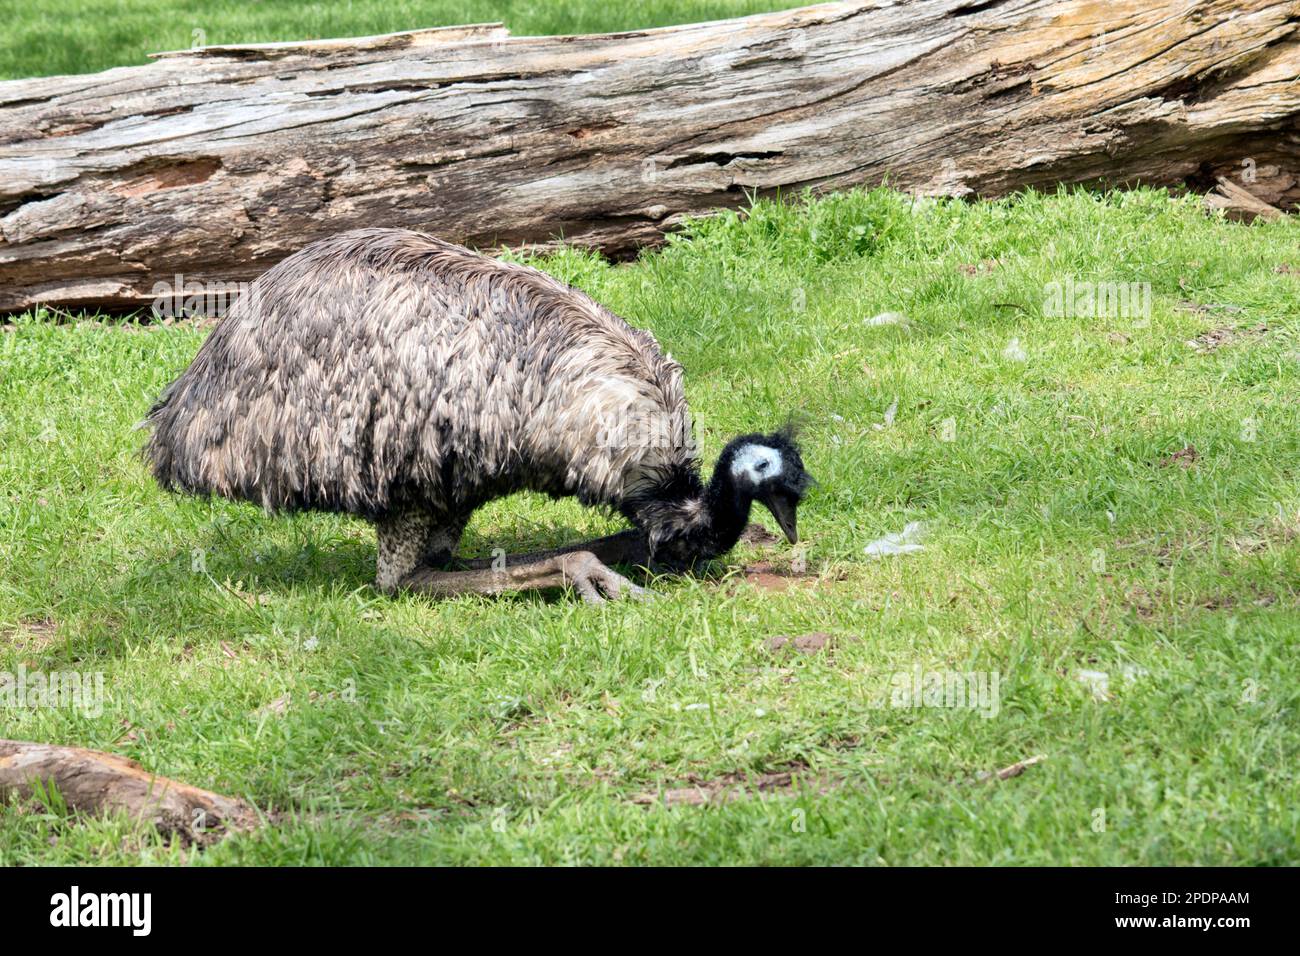 the emu is sitting down eating grass Stock Photo